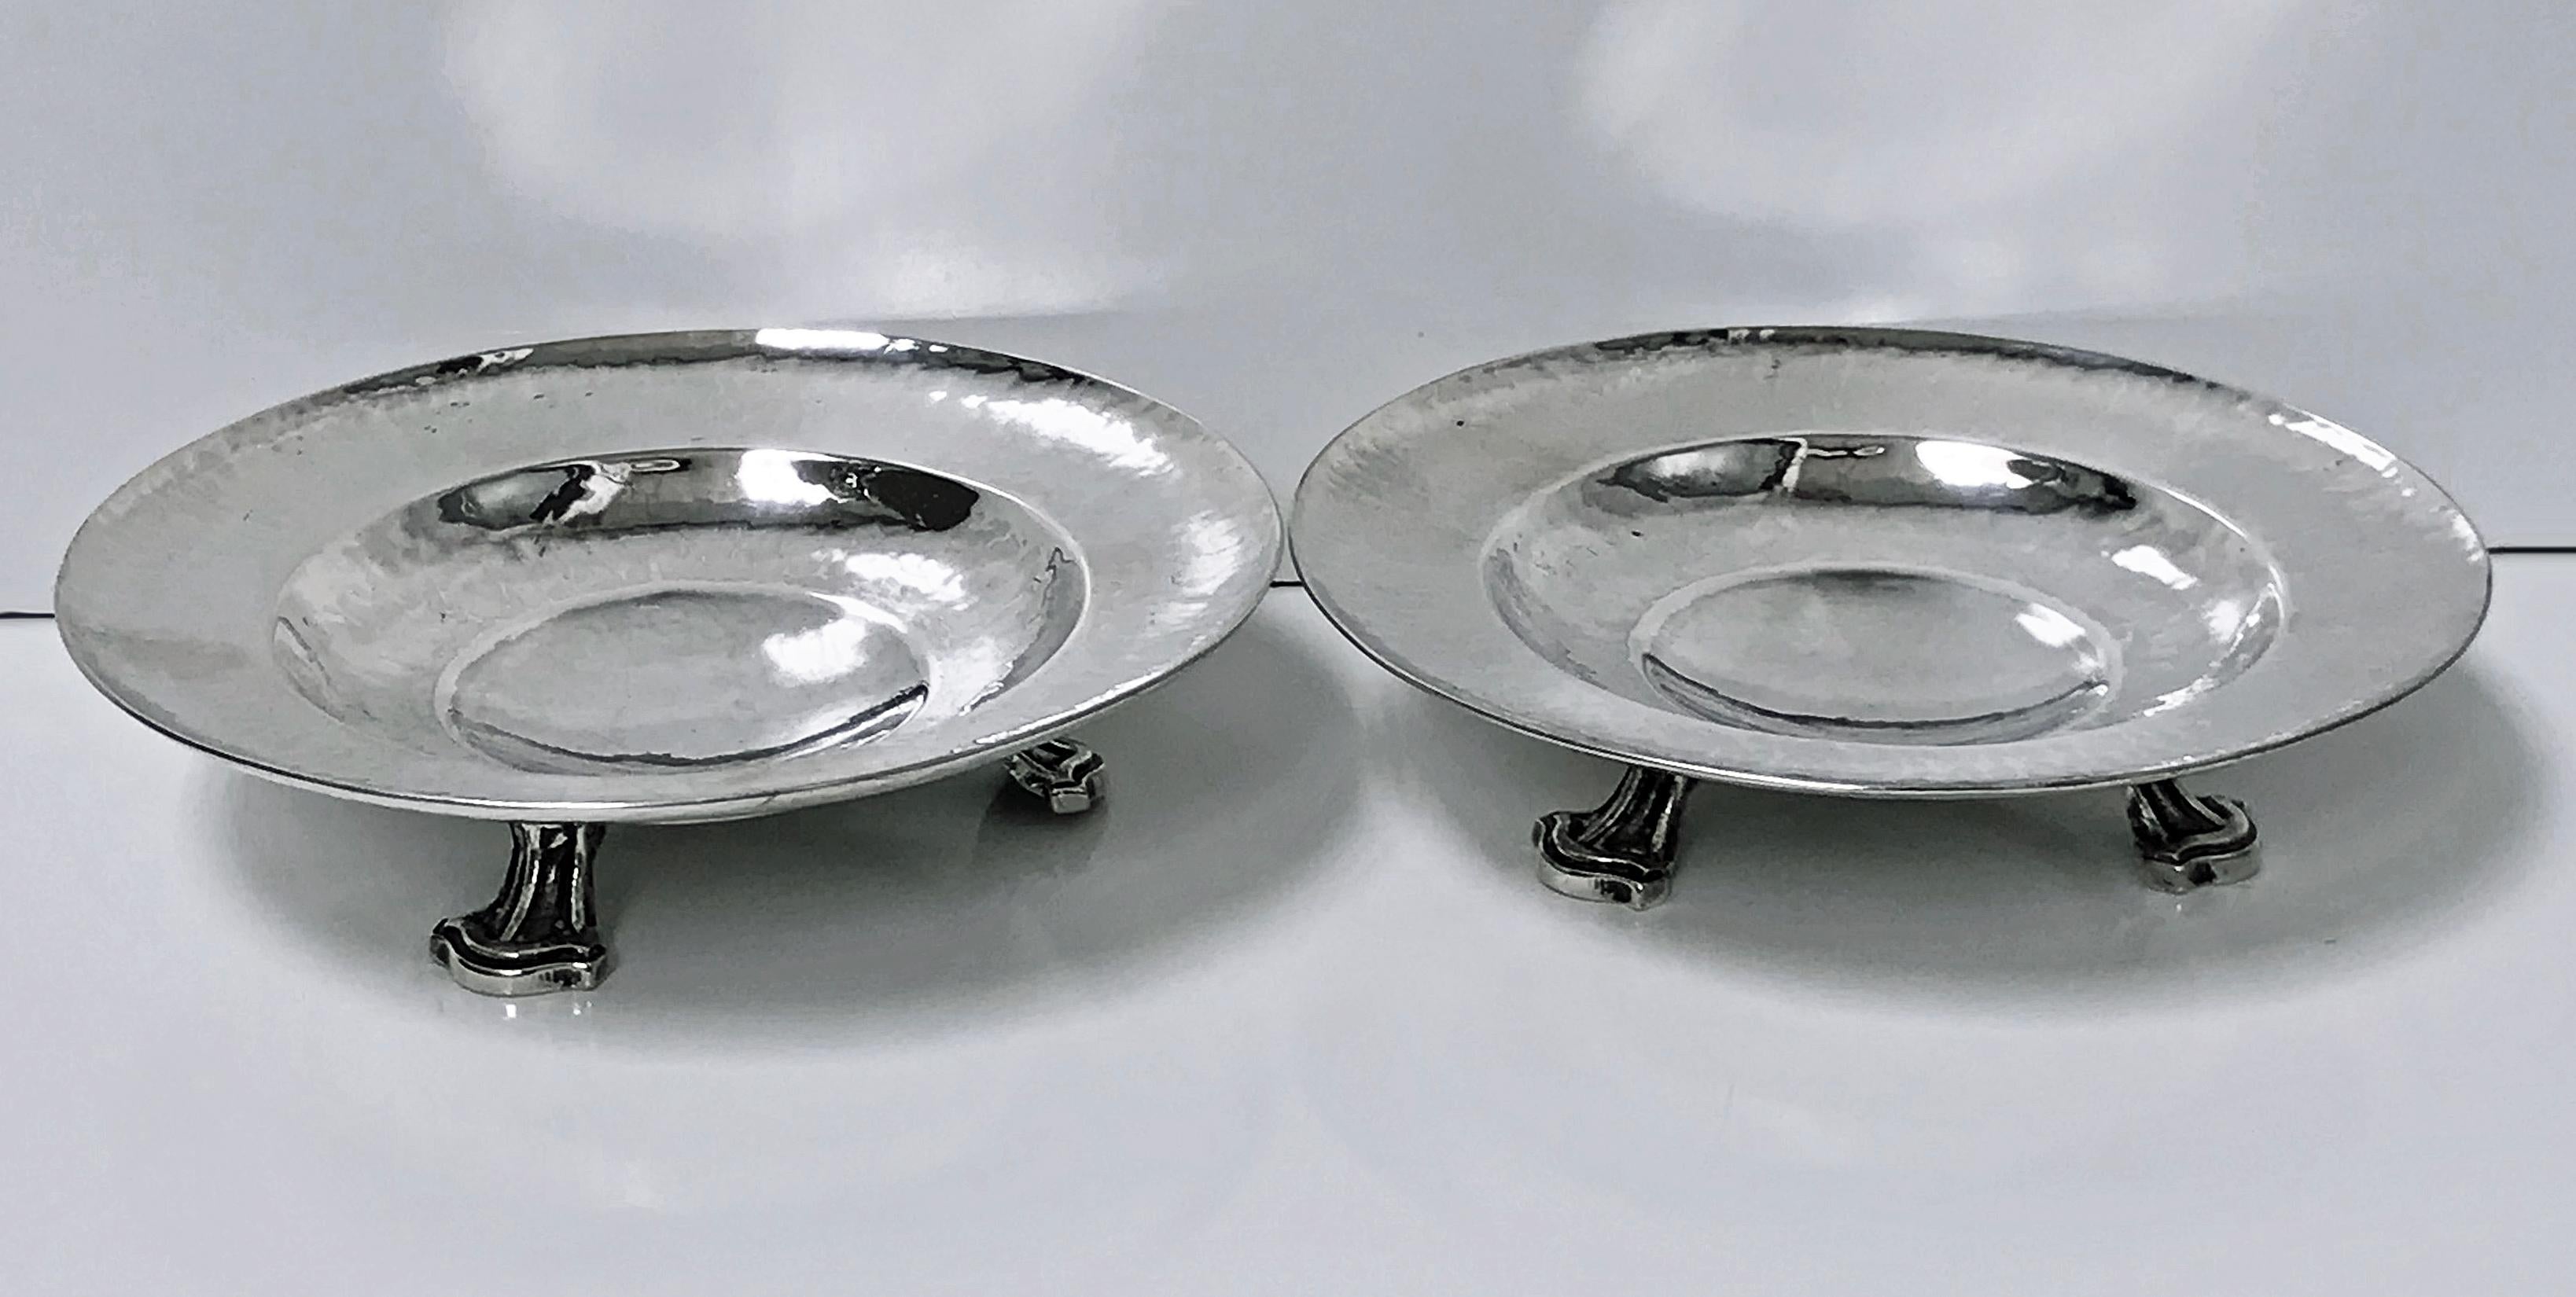 Fine pair of Omar Ramsden Sterling Silver dishes, London, 1931. Each on three stylised turned supports, welled interiors, planished hammered silver. Marks on each for Made by Omar Ramsden, London in 1931 and Omar Ramsden Me Fecit. (Latin: Omar